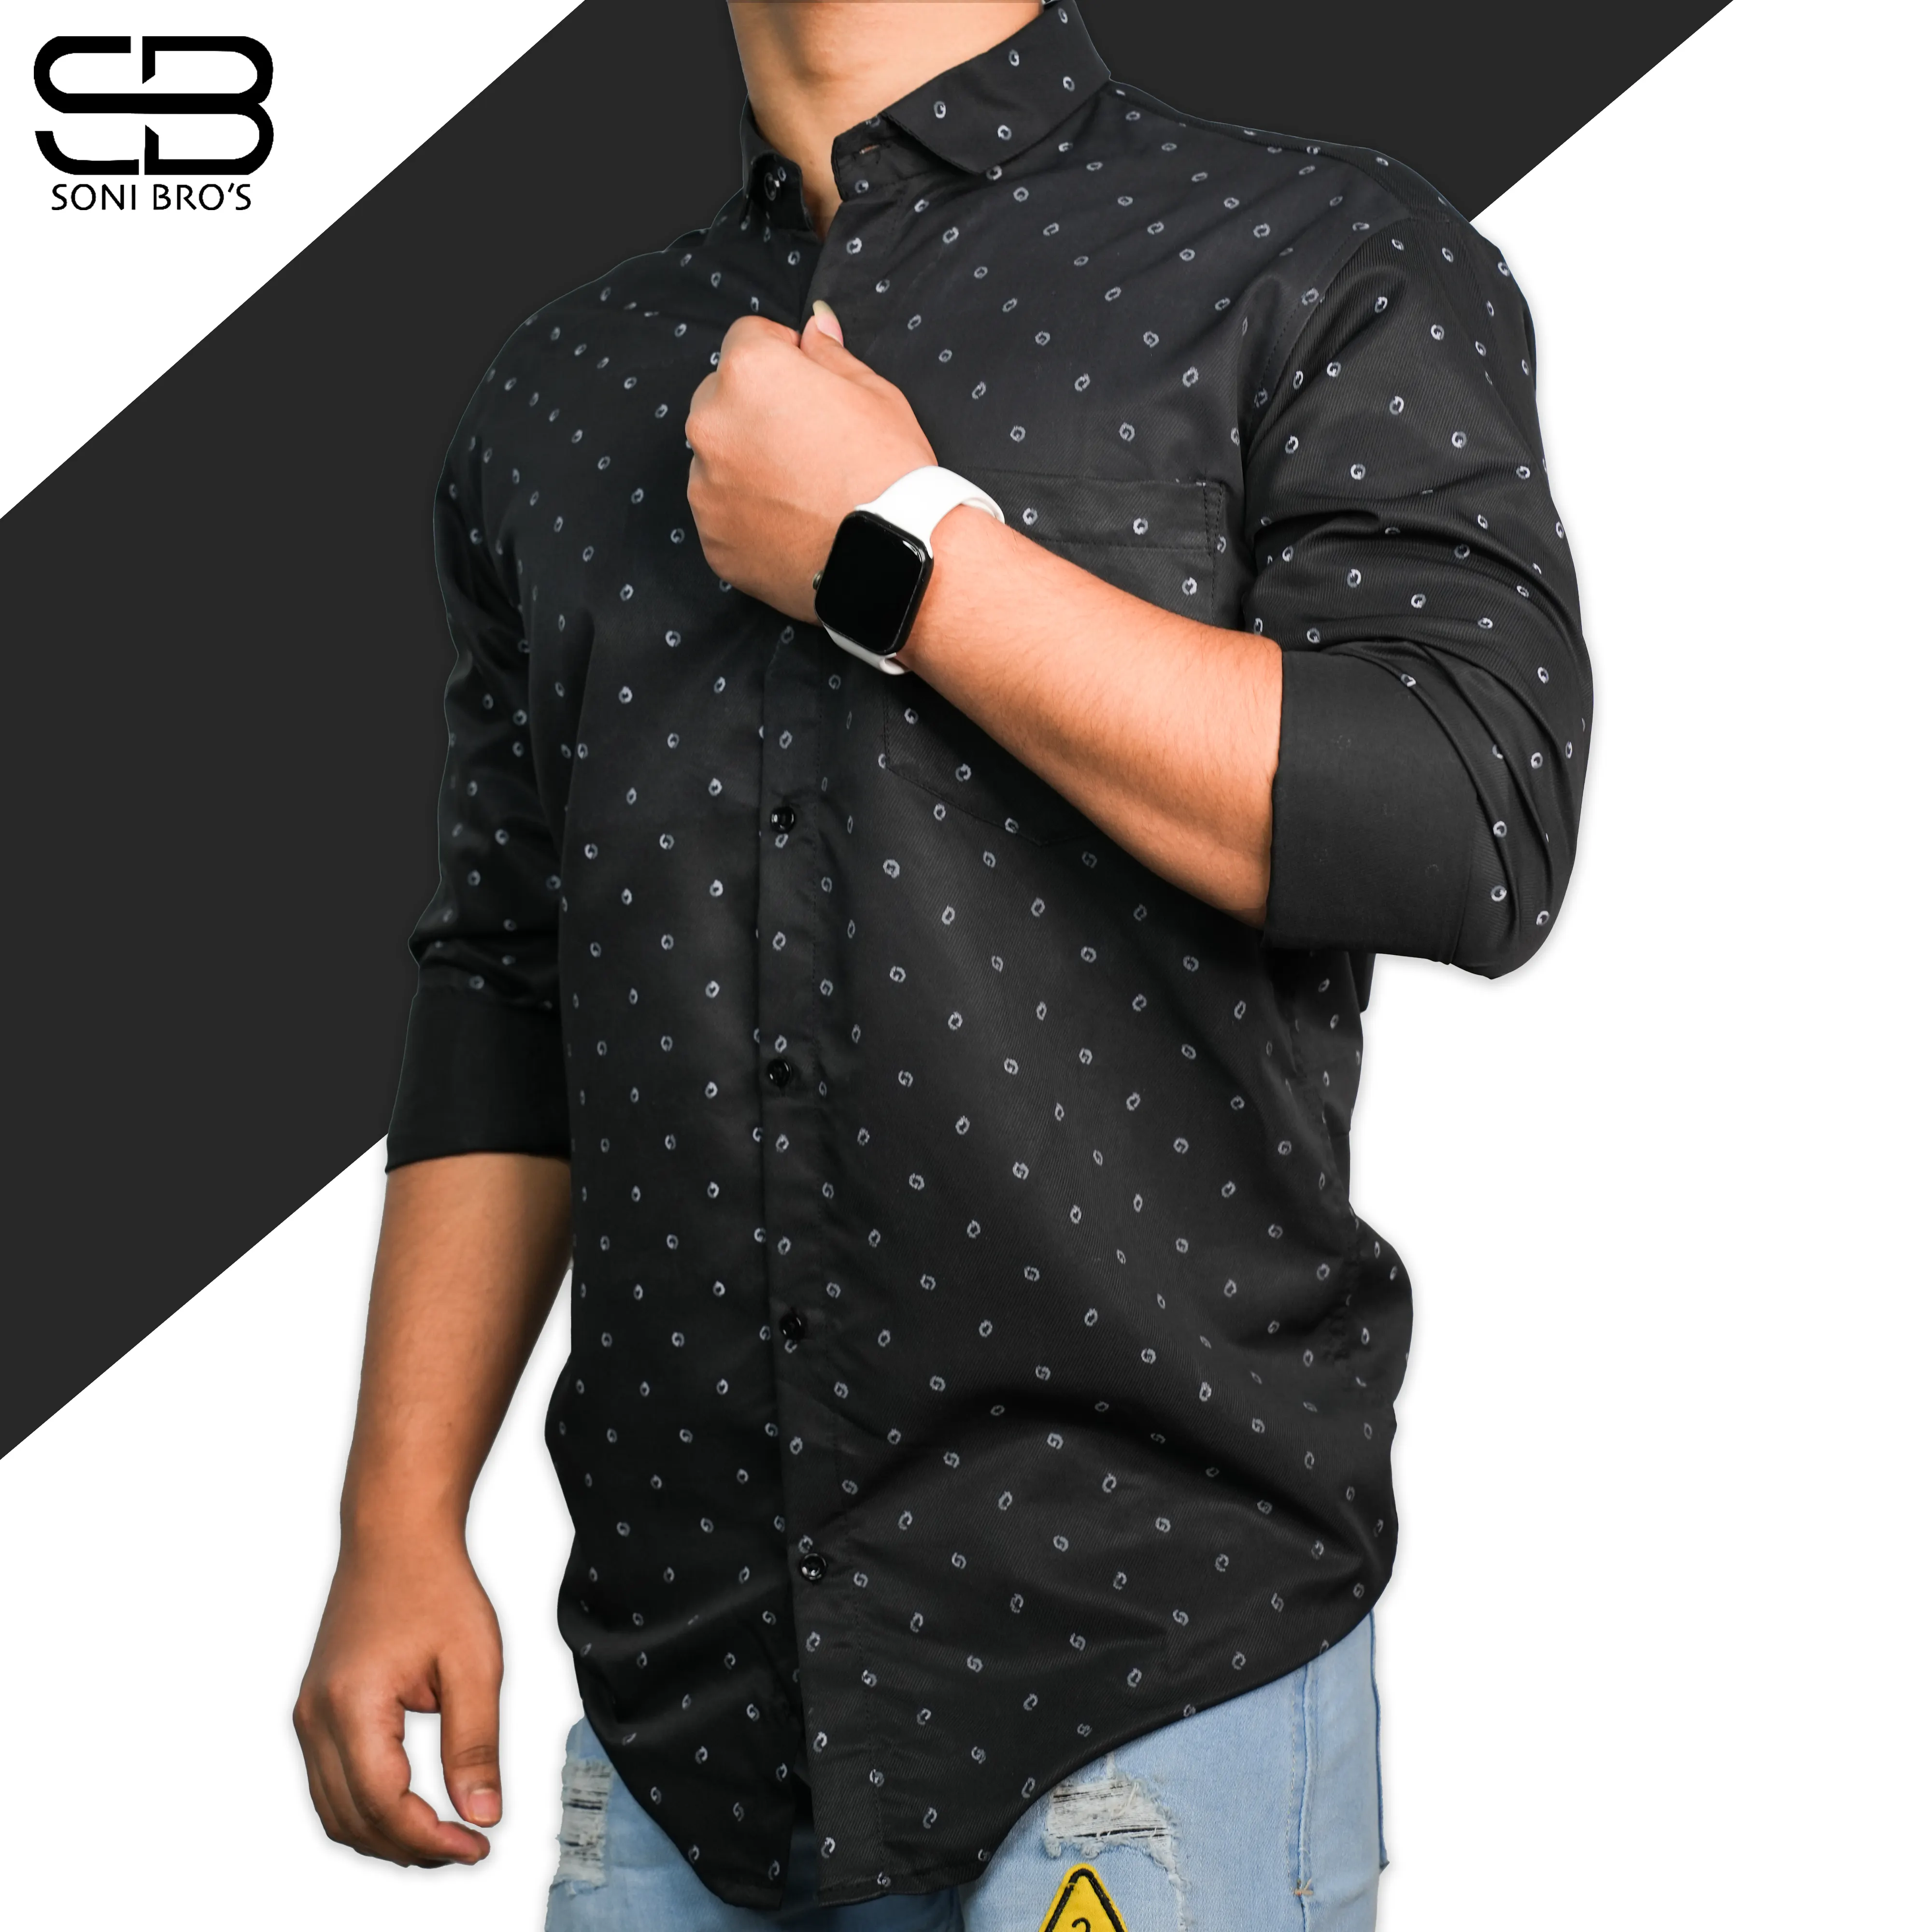 Shirt With All Over Print With Best Quality Fabric Of Cotton Shirt Men Long Sleeves Casual